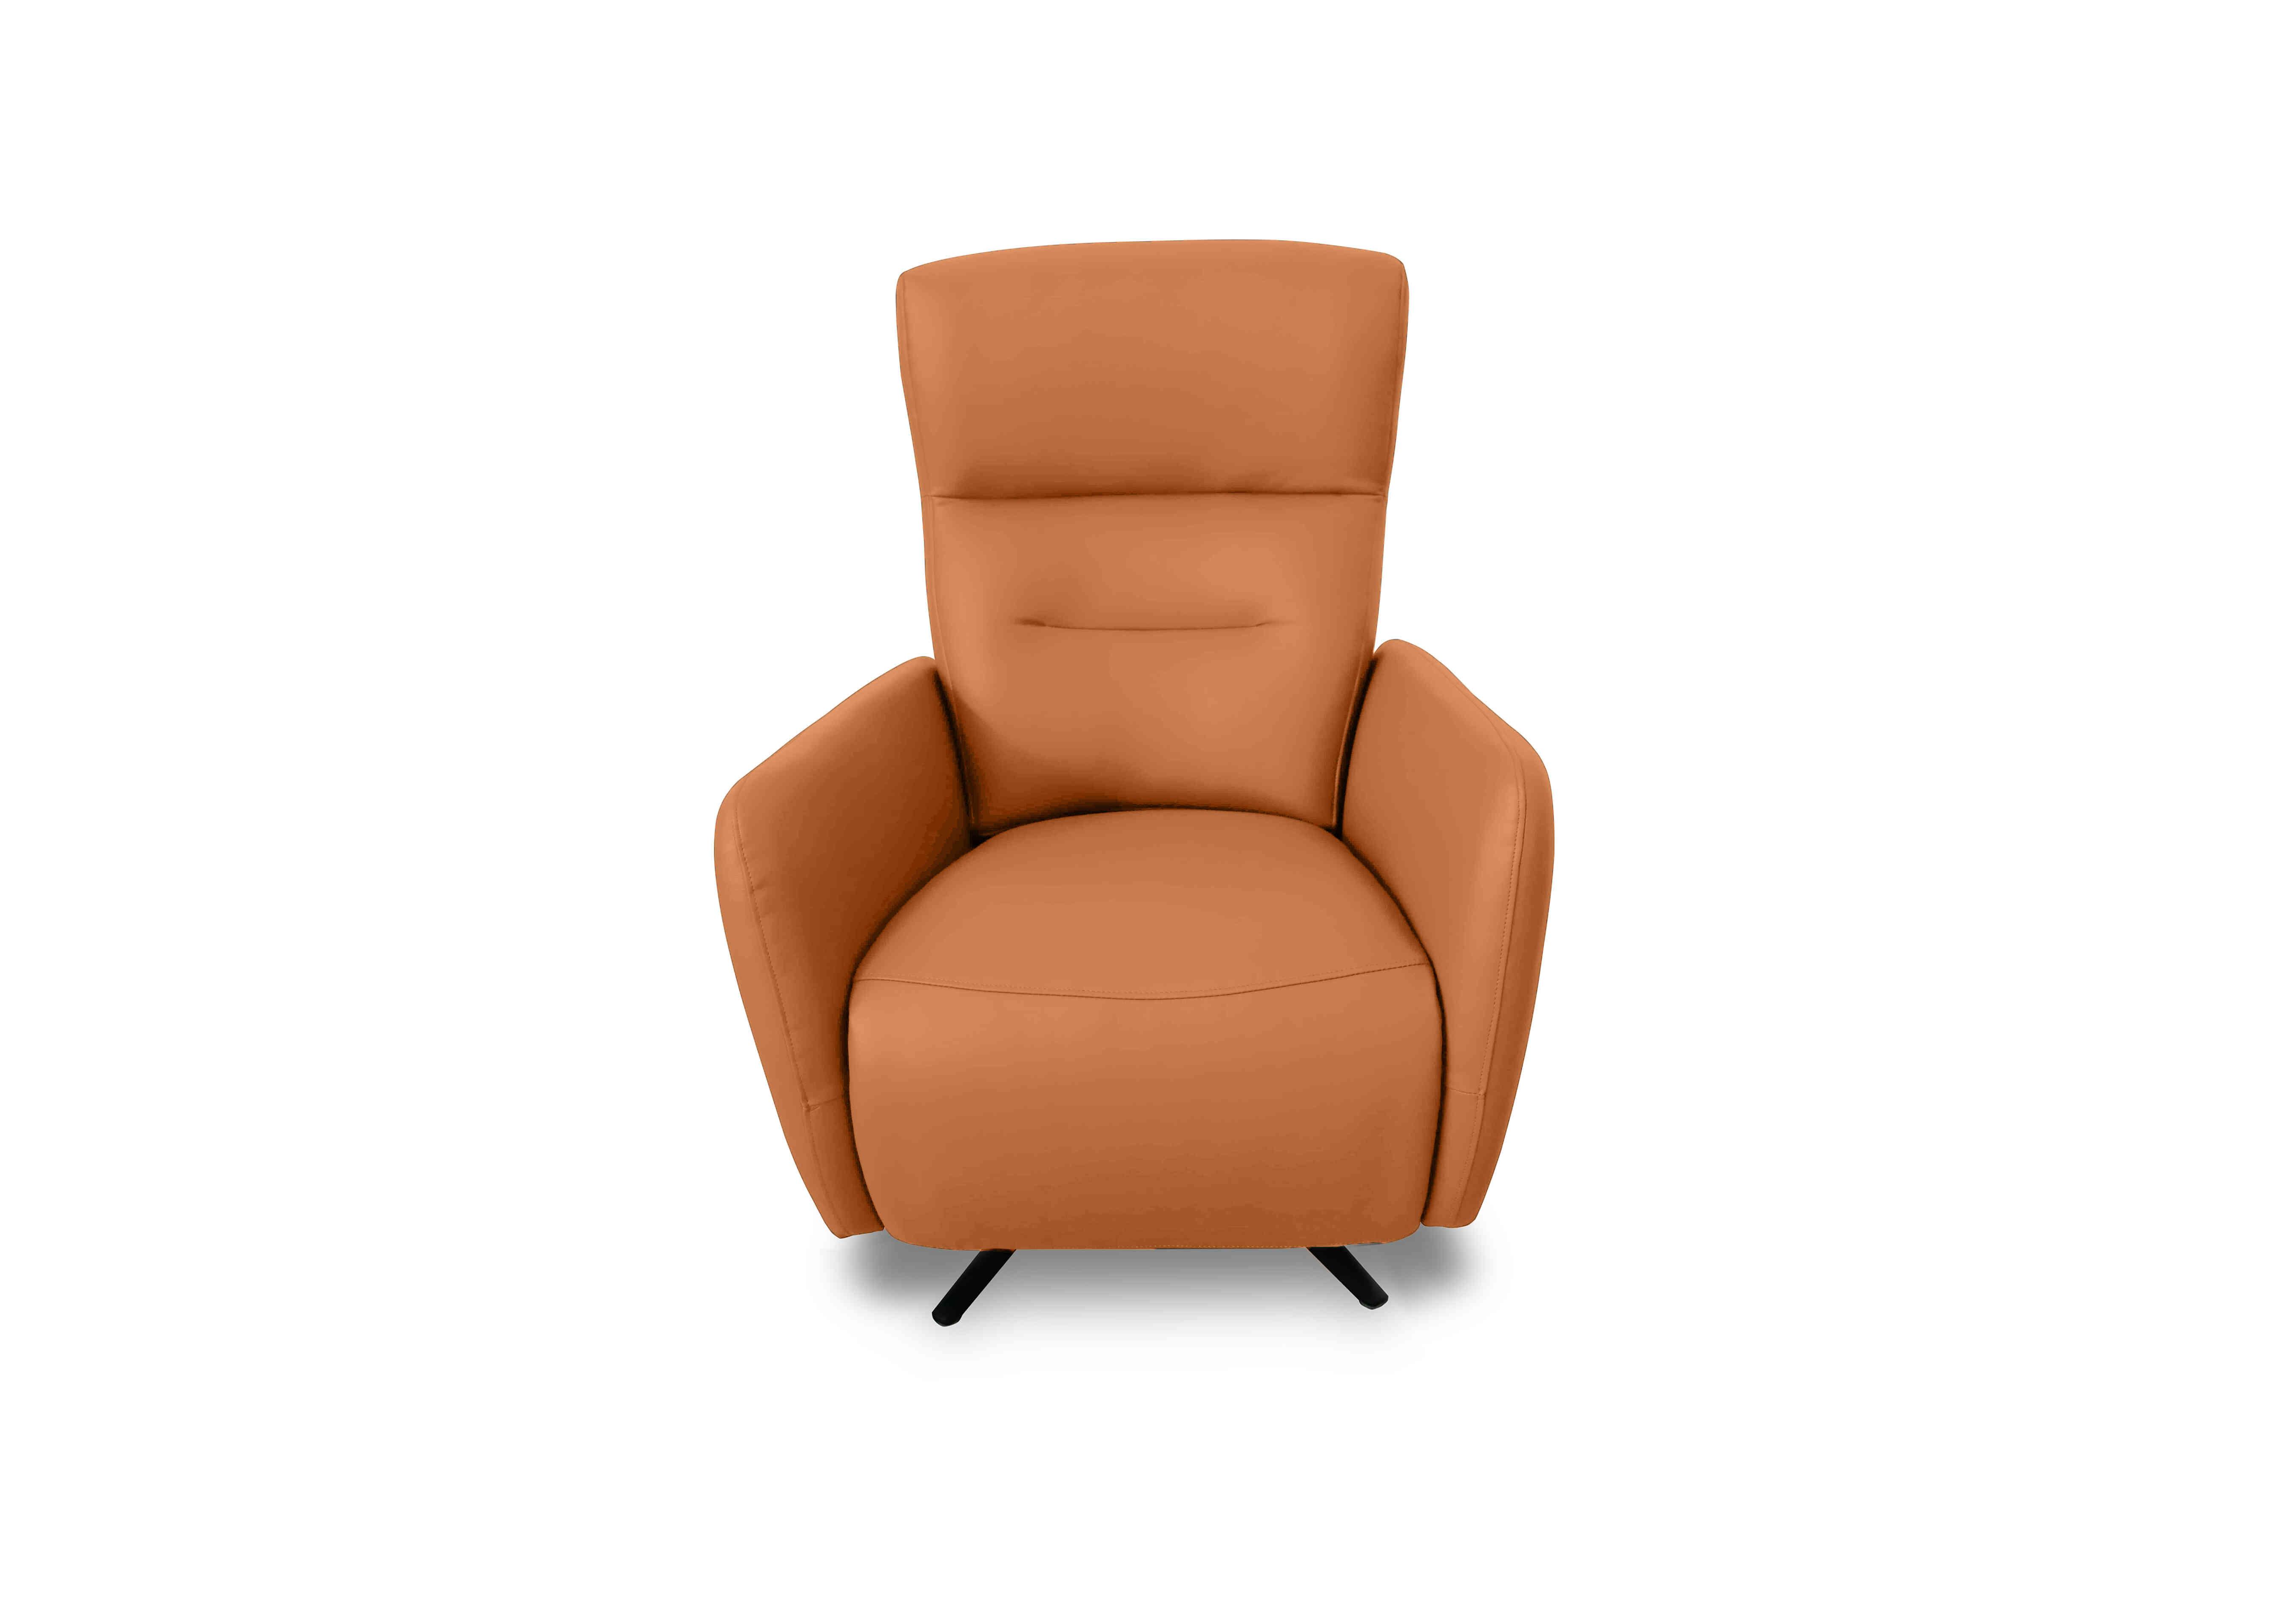 Designer Chair Collection Le Mans Leather Dual Power Recliner Swivel Chair in Nc-335e Honey Yellow on Furniture Village